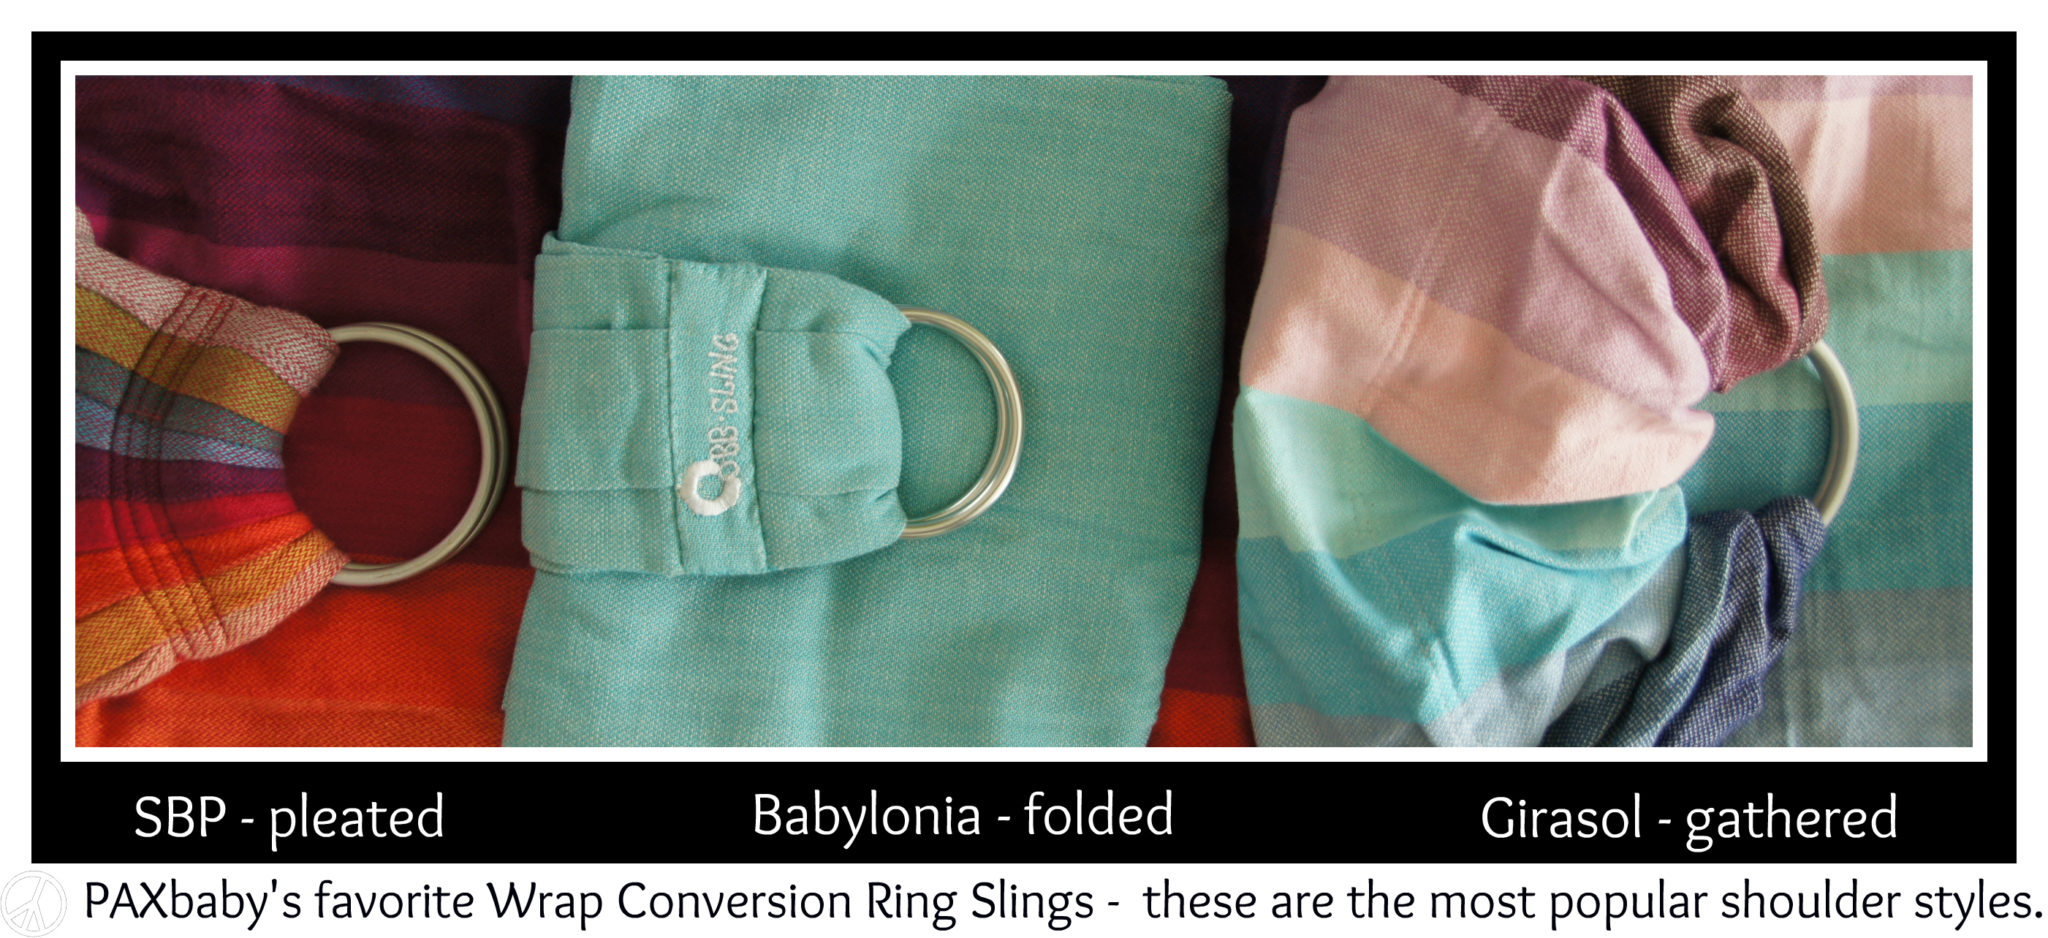 PAXbaby wrap conversion ring sling shoulder styles sbp wcrs babylonia bb sling girasol pleats pleated gathered folded